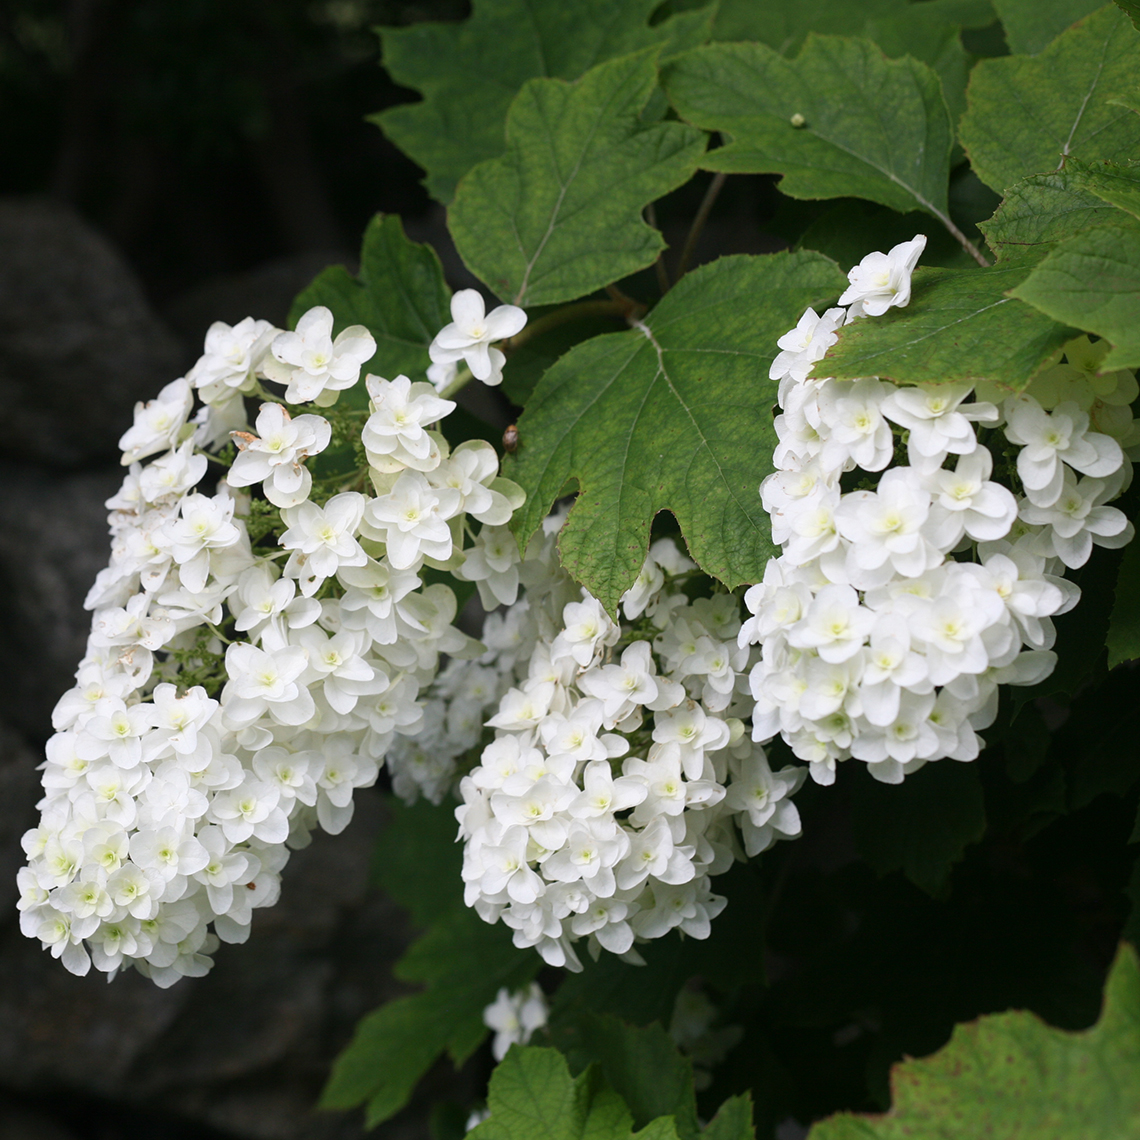 Closeup of the flowers of Snowflake oakleaf hydrangea with the double florets clearly visible